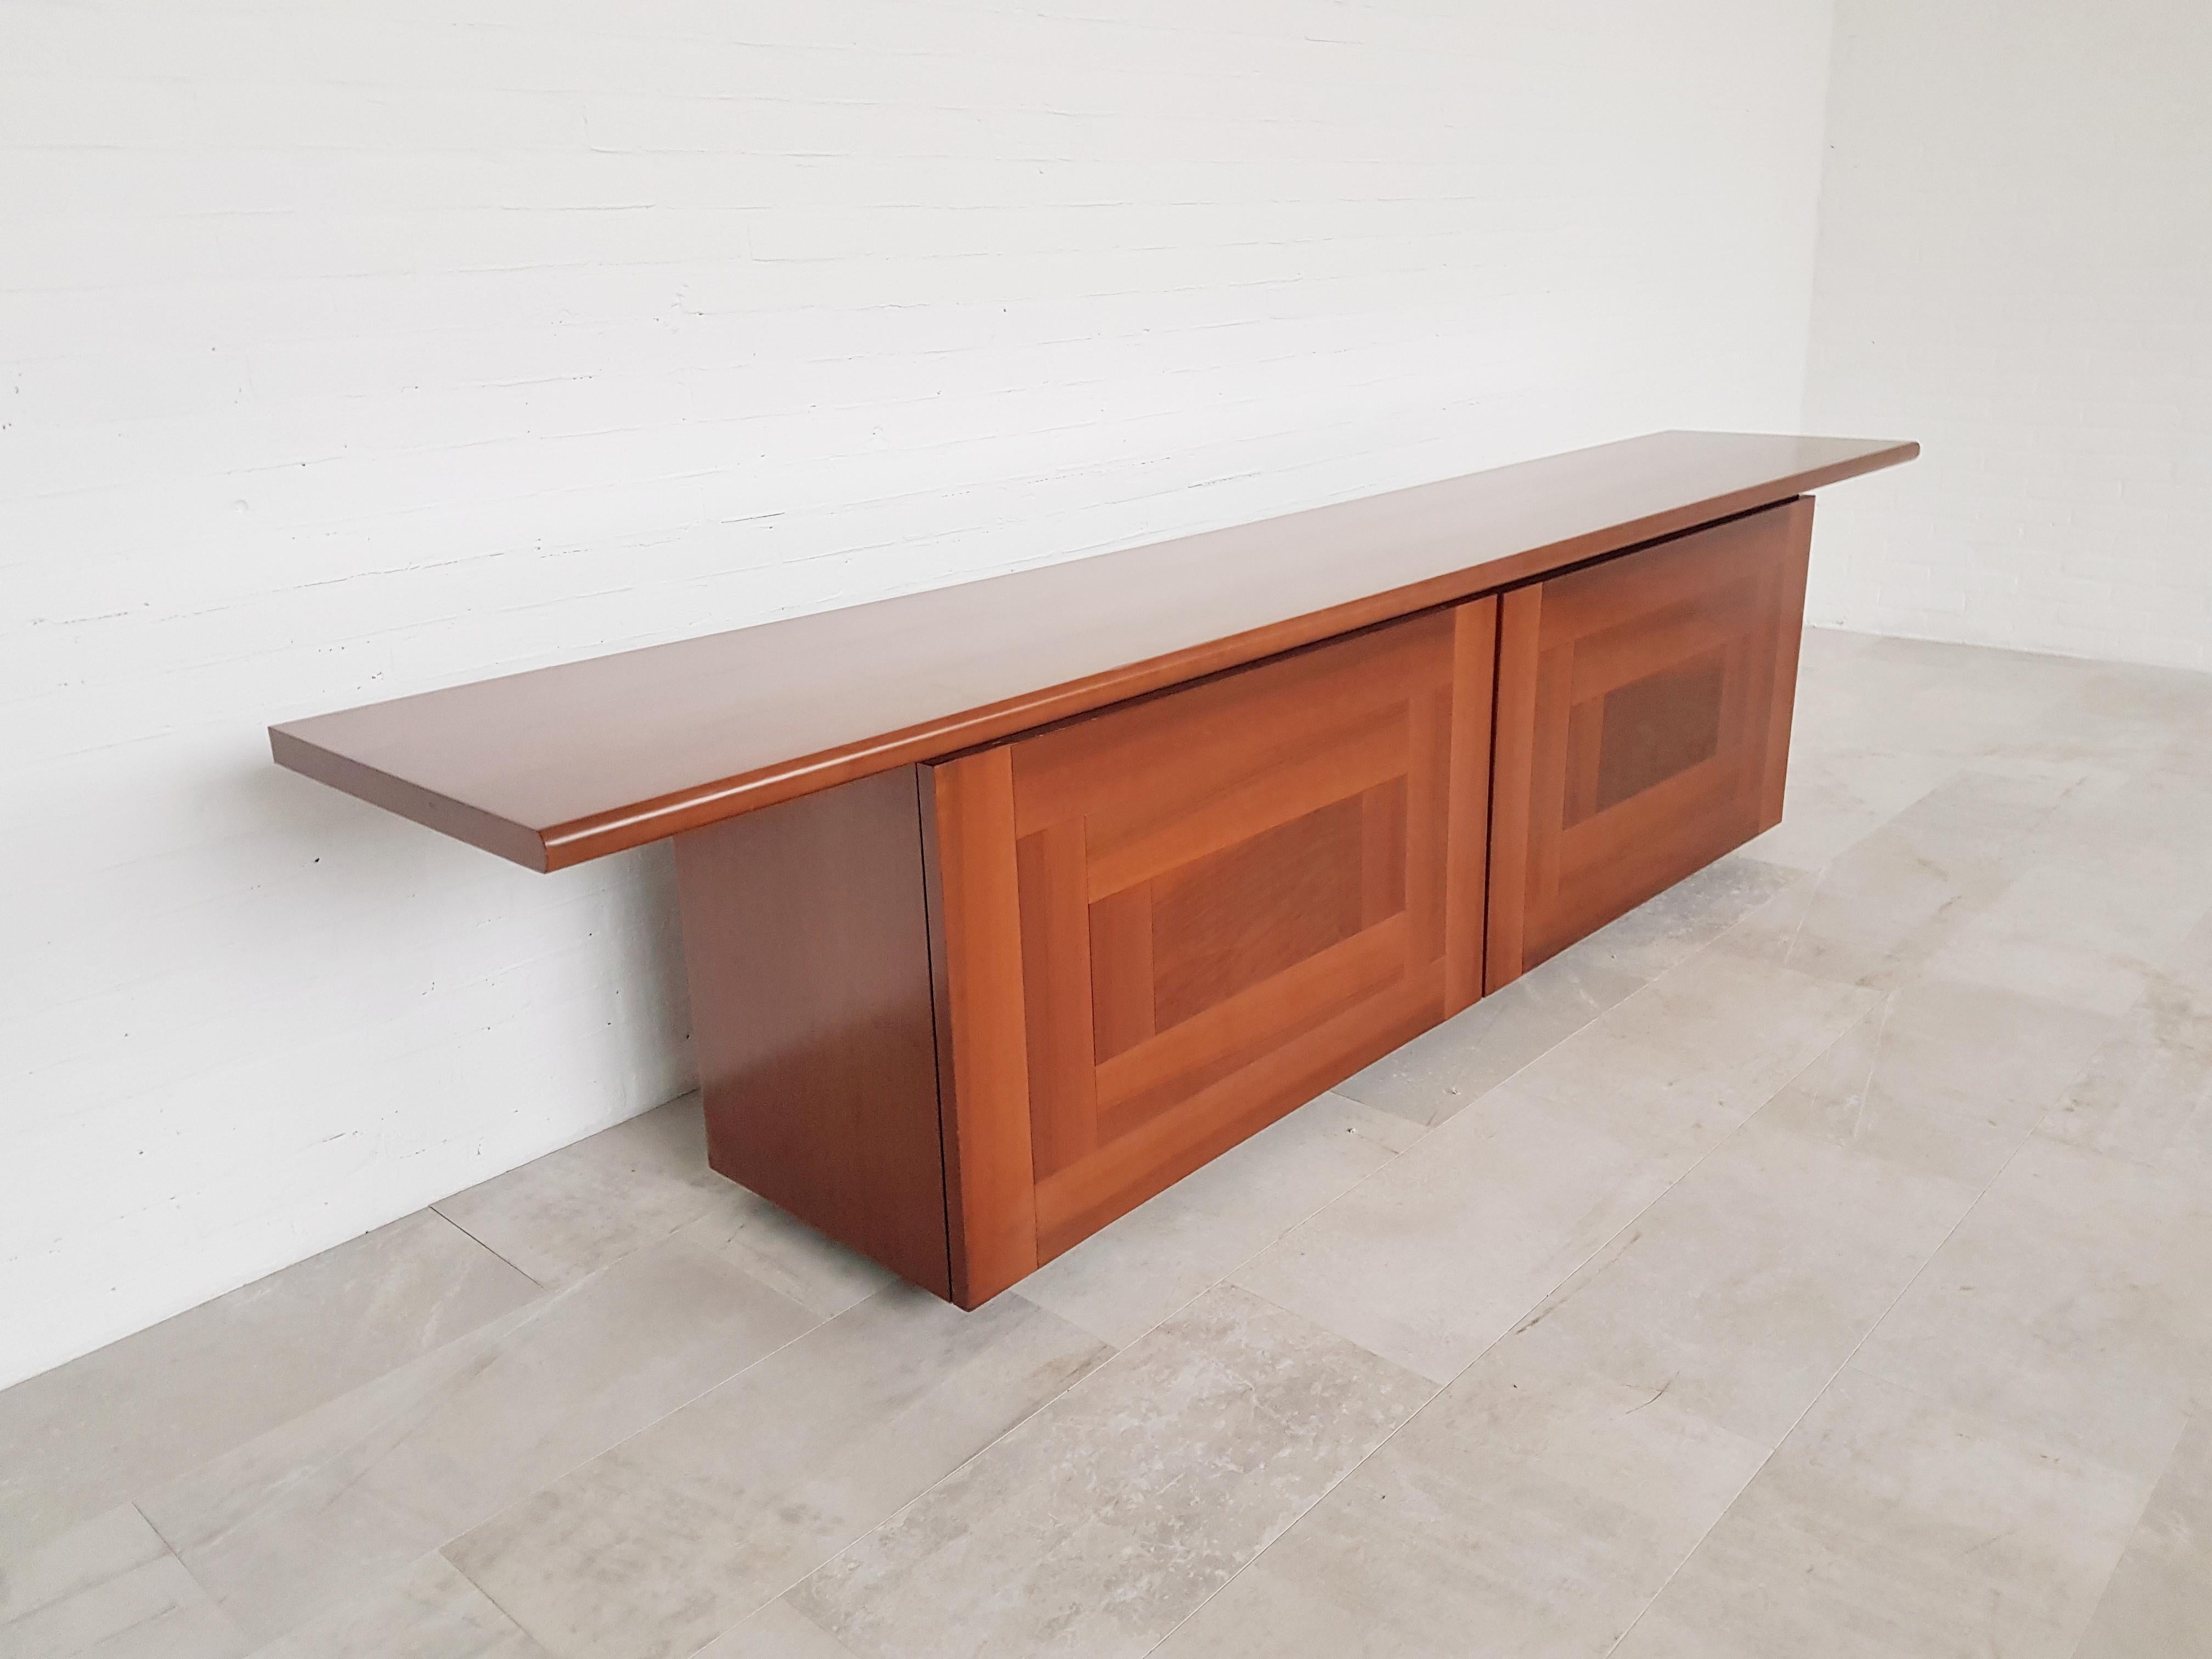 Acerbis Sheraton Post-Modern Sideboard by Giotto Stoppino (Postmoderne)